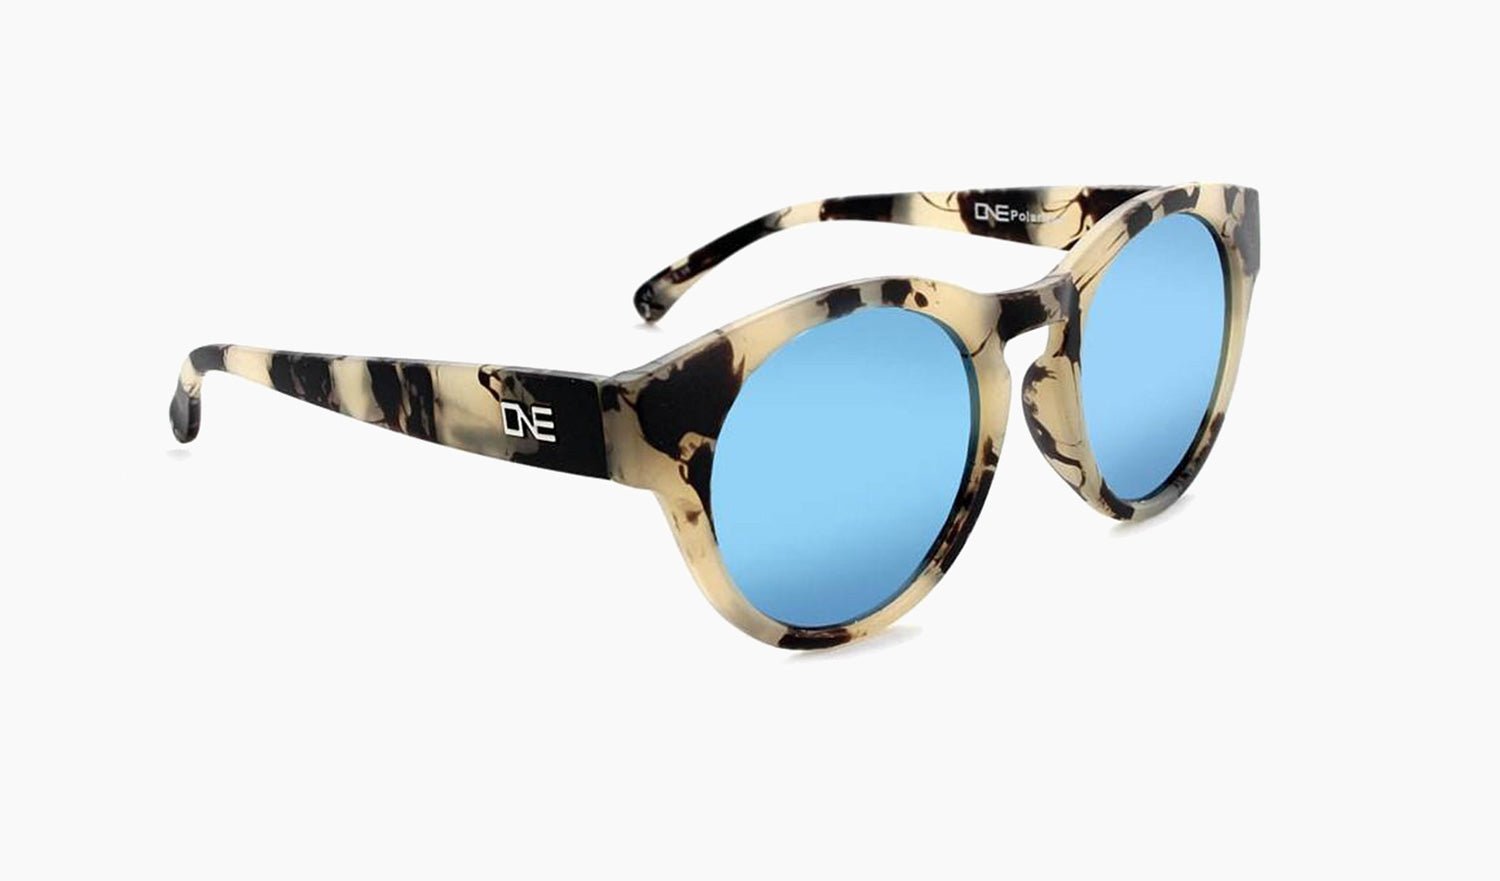 What is it about sunglasses that makes you look cool? - Quora